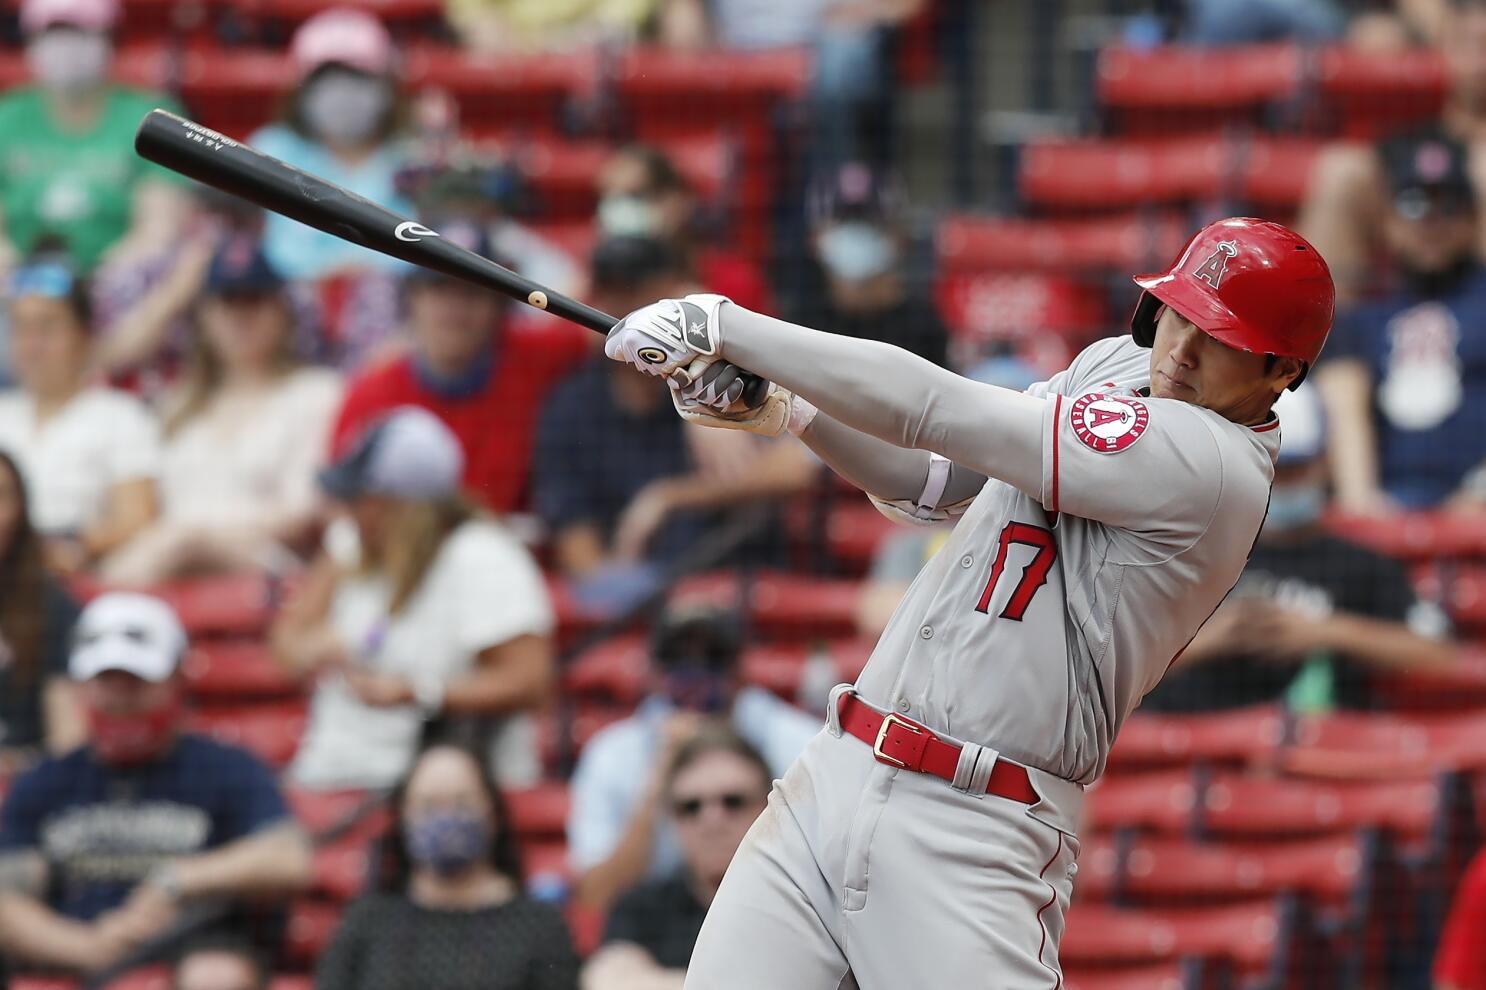 Video: Mike Trout hits first Fenway Park home run vs. Red Sox 